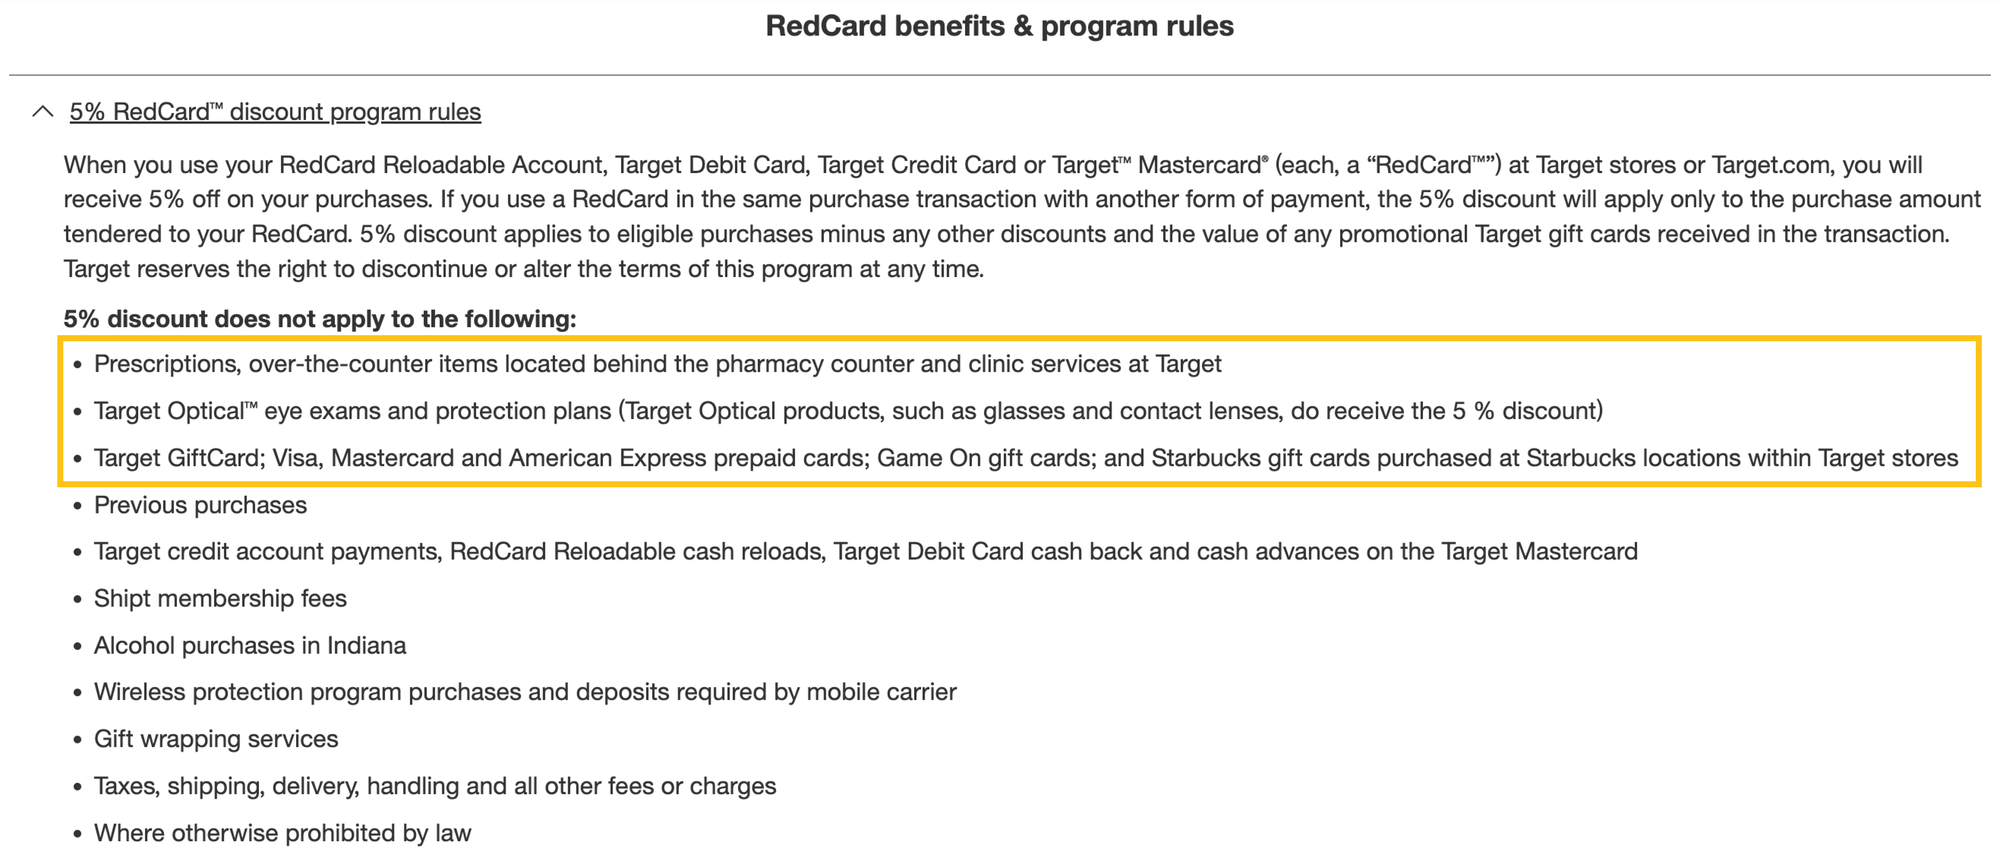 A screenshot of the RedCard benefits and program rules fine print: When you use your RedCard Reloadable Account, Target Debit Card, Target Credit Card or Target Mastercard (each, a “RedCard”) at Target stores or Target.com, you will receive 5% off on your purchases. If you use a RedCard in the same purchase transaction with another form of payment, the 5% discount will apply only to the purchase amount tendered to your RedCard. 5% discount applies to eligible purchases minus any other discounts and the value of any promotional Target gift cards received in the transaction. Target reserves the right to discontinue or alter the terms of this program at any time. 5% discount does not apply to the following: Prescriptions, over-the-counter items located behind the pharmacy counter and clinic services at Target, Target Optical eye exams and protection plans (Target Optical products, such as glasses and contact lenses, do receive the 5 % discount), Target GiftCard; Visa, Mastercard and American Express prepaid cards; Game On gift cards; and Starbucks gift cards purchased at Starbucks locations within Target stores, Previous purchases, Target credit account payments, RedCard Reloadable cash reloads, Target Debit Card cash back and cash advances on the Target Mastercard, Shipt membership fees, Alcohol purchases in Indiana, Wireless protection program purchases and deposits required by mobile carrier, Gift wrapping services, Taxes, shipping, delivery, handling and all other fees or charges, and Where otherwise prohibited by law.